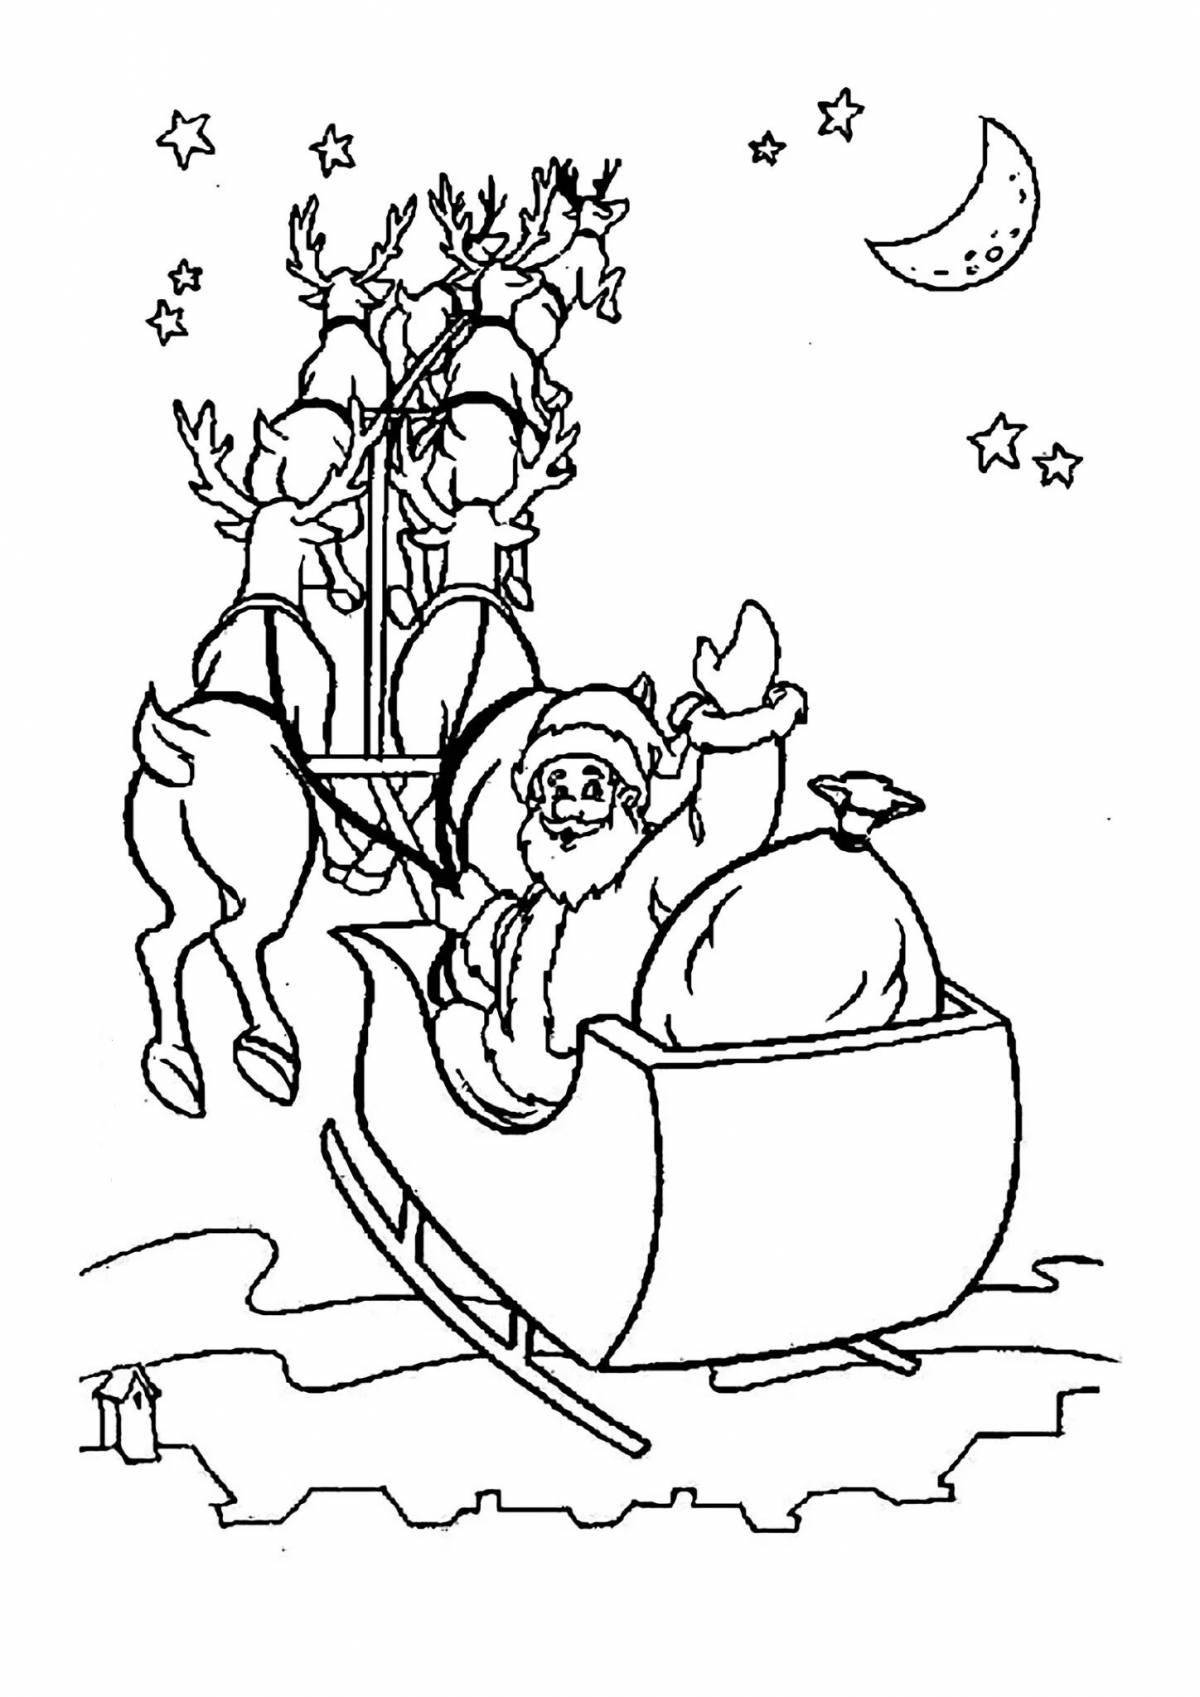 Coloring page cheerful santa claus on a sleigh